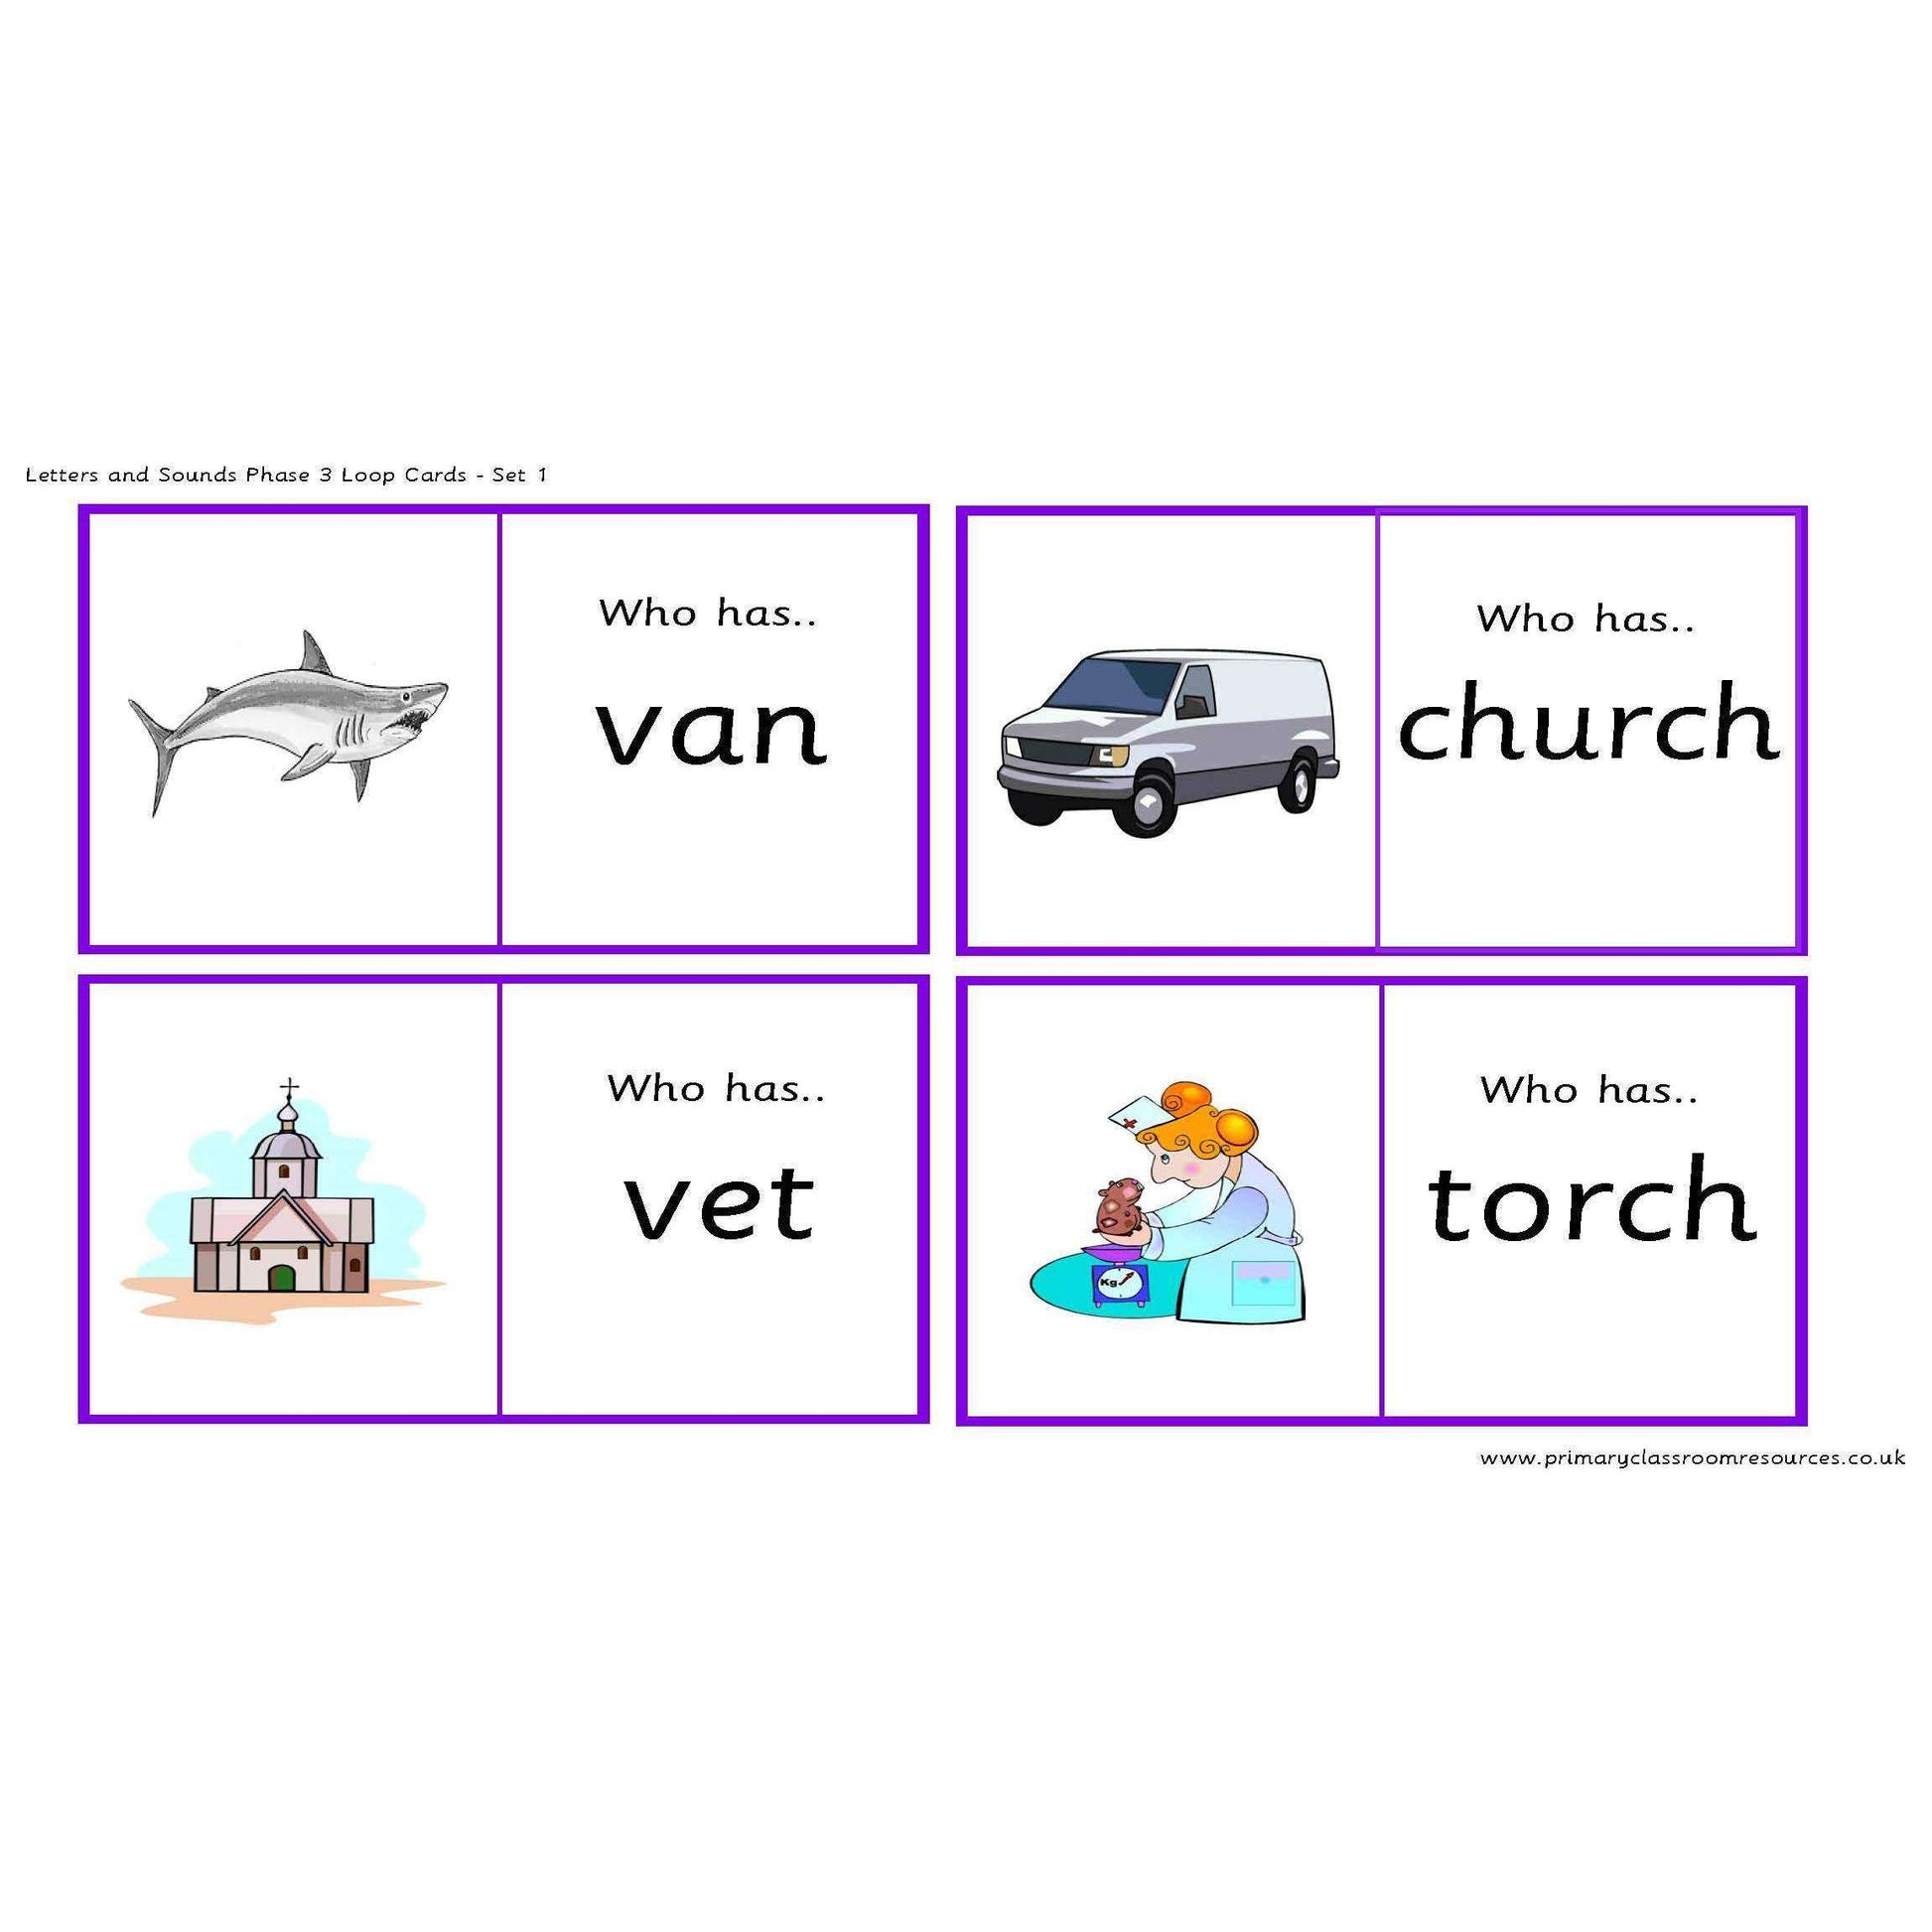 Letters and Sounds Phase 3 Loop Cards - Set 1:Primary Classroom Resources